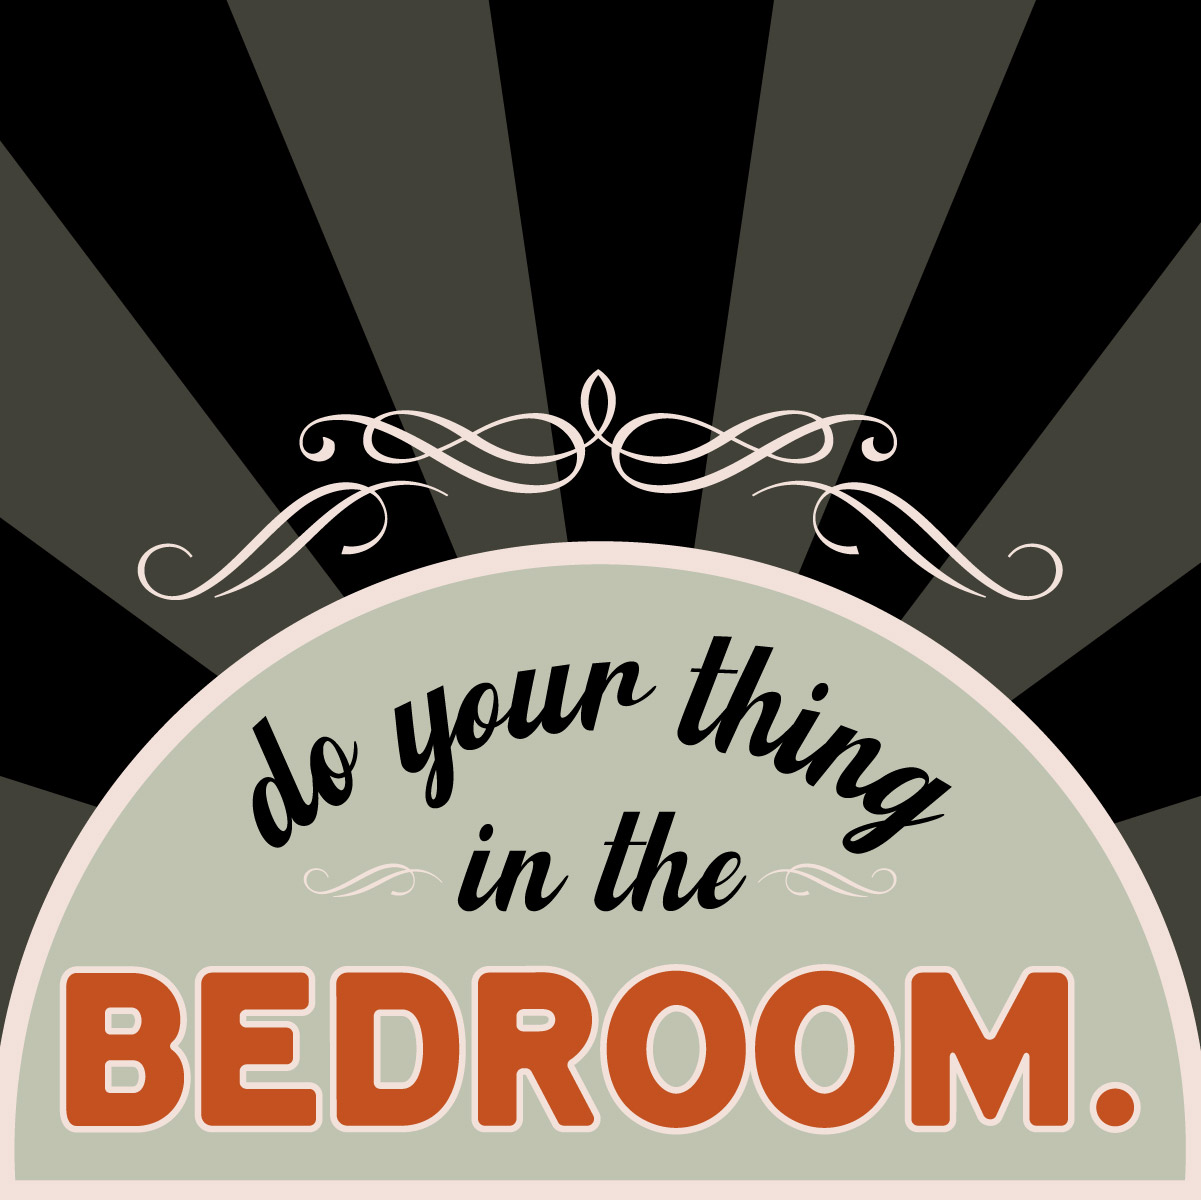 do your thing in the BEDROOM.